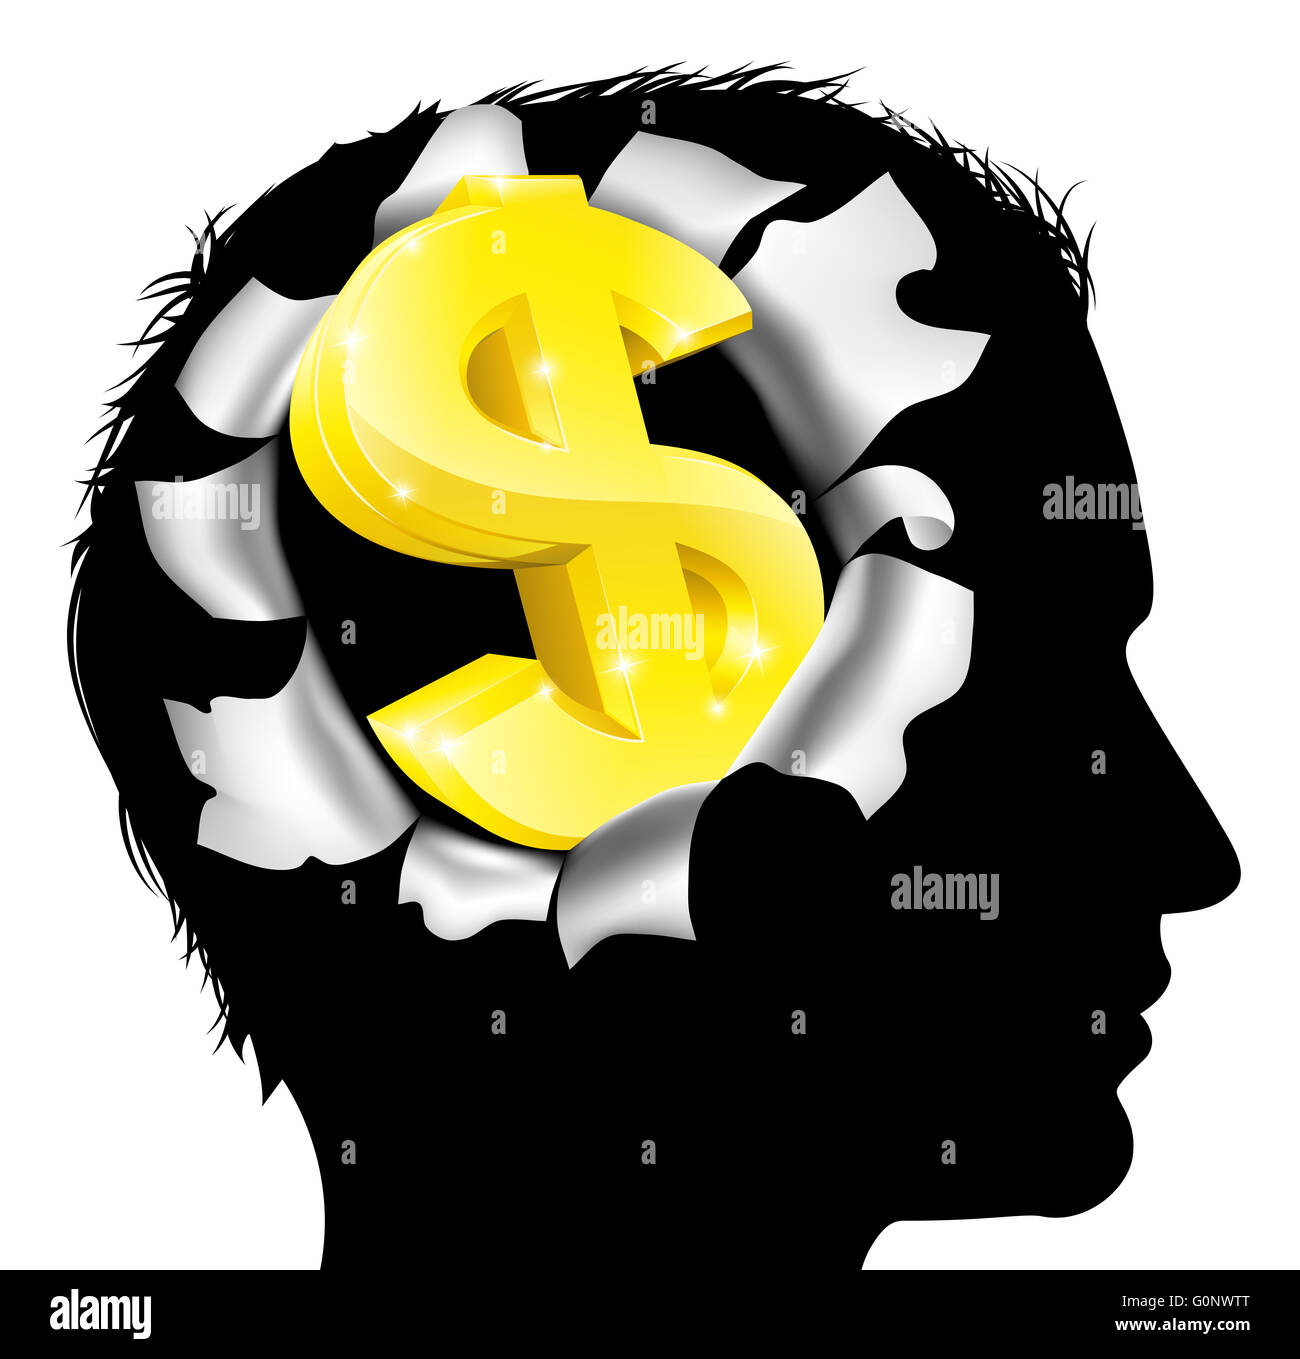 A mans head in silhouette with gold dollar sign symbol. Concept for thinking or dreaming about making money or business success Stock Photo